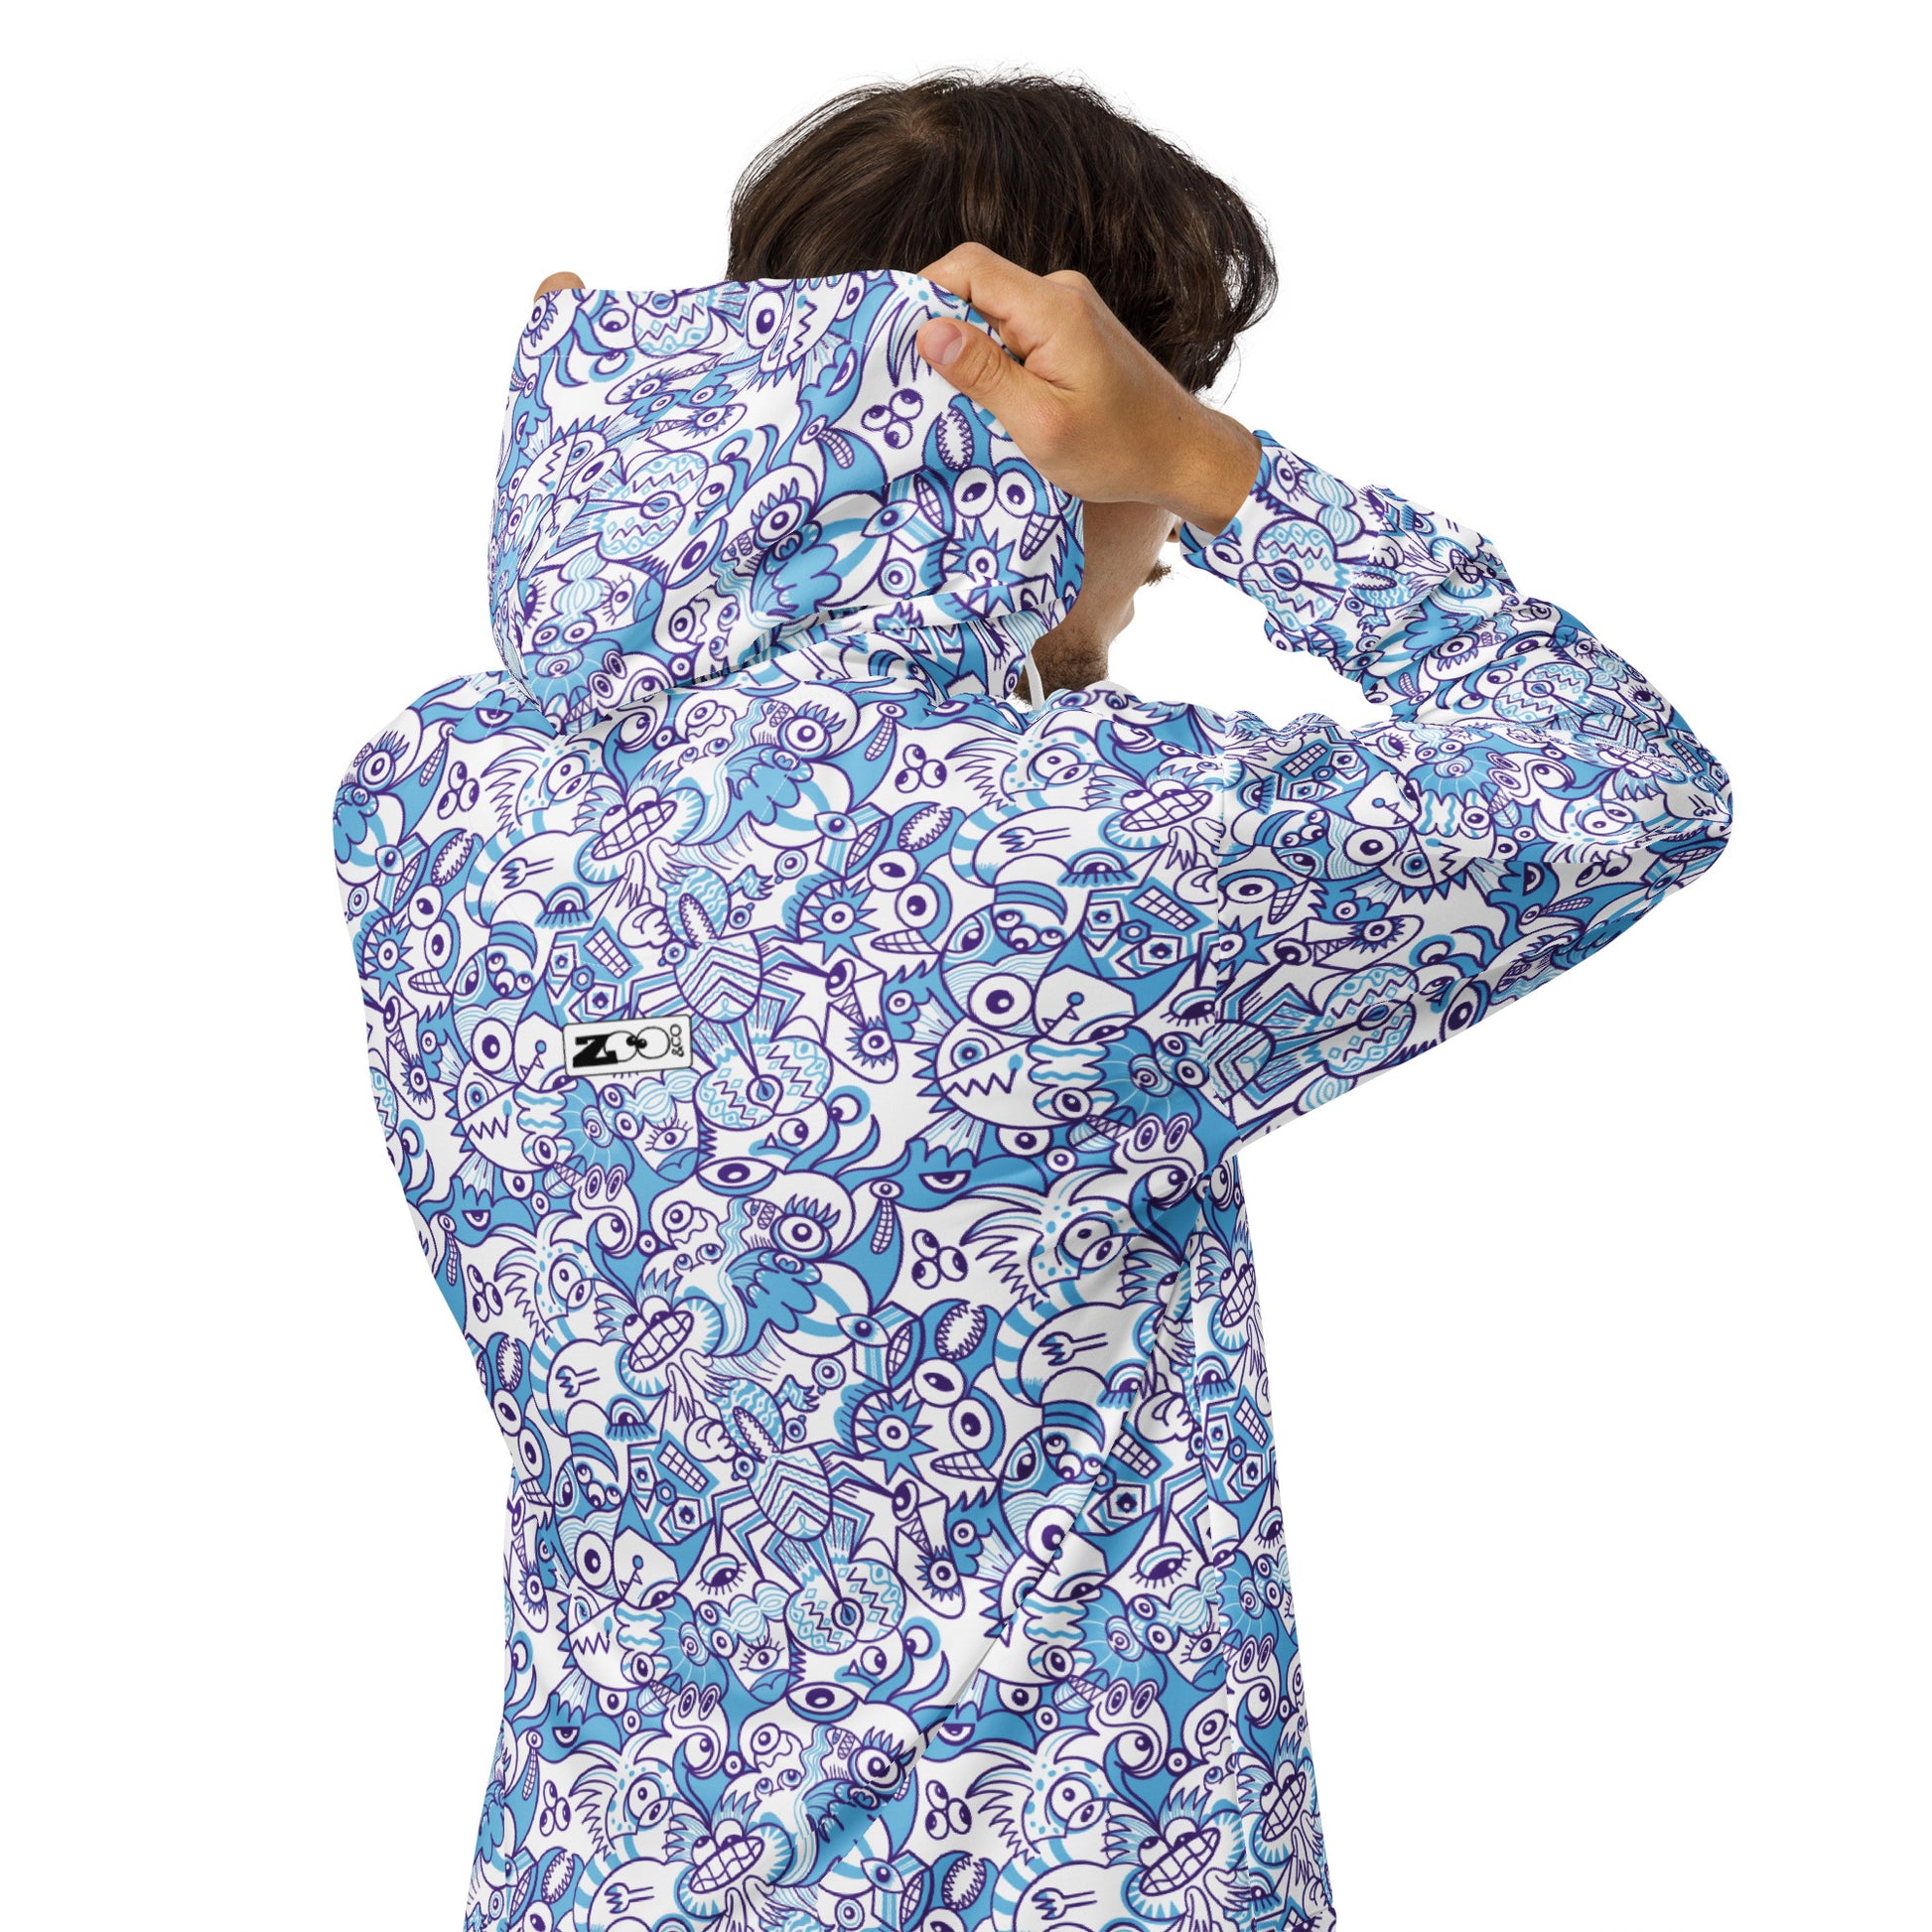 Whimsical Blue Doodle Critterscape pattern design - Unisex zip hoodie. Lifestyle